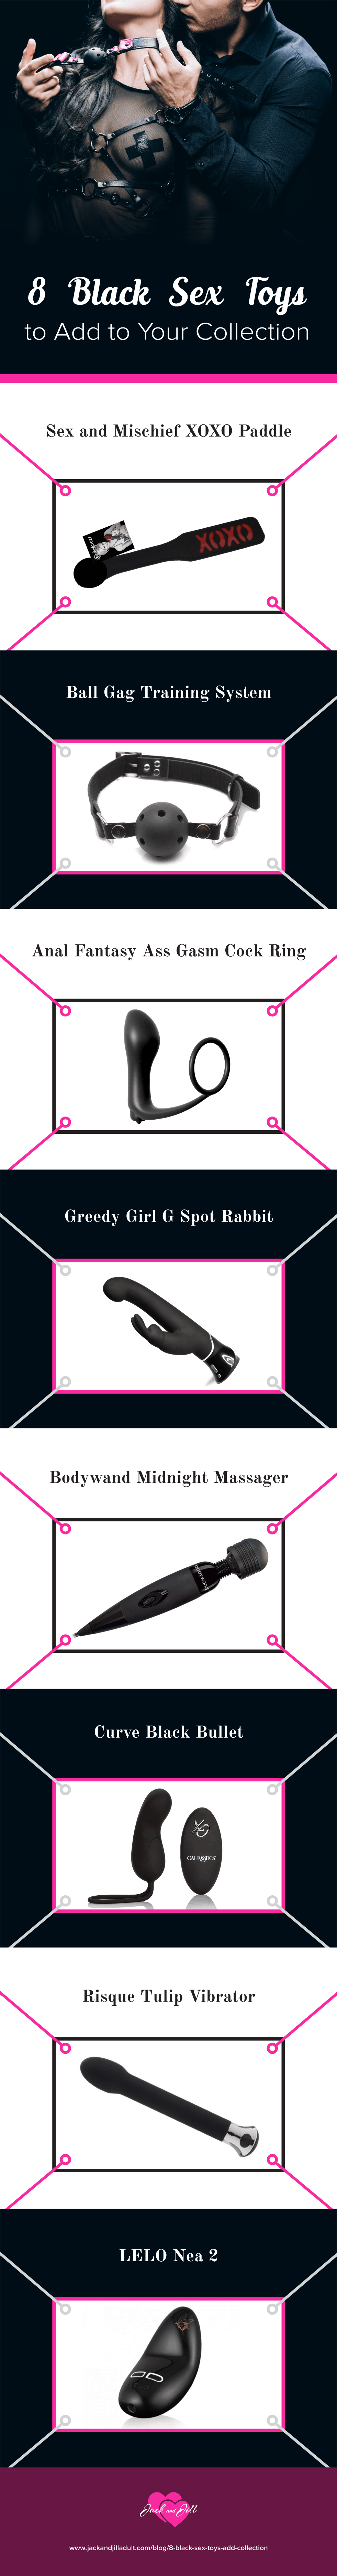 Infographic for 8 Black Sex Toys to Add to Your Collection